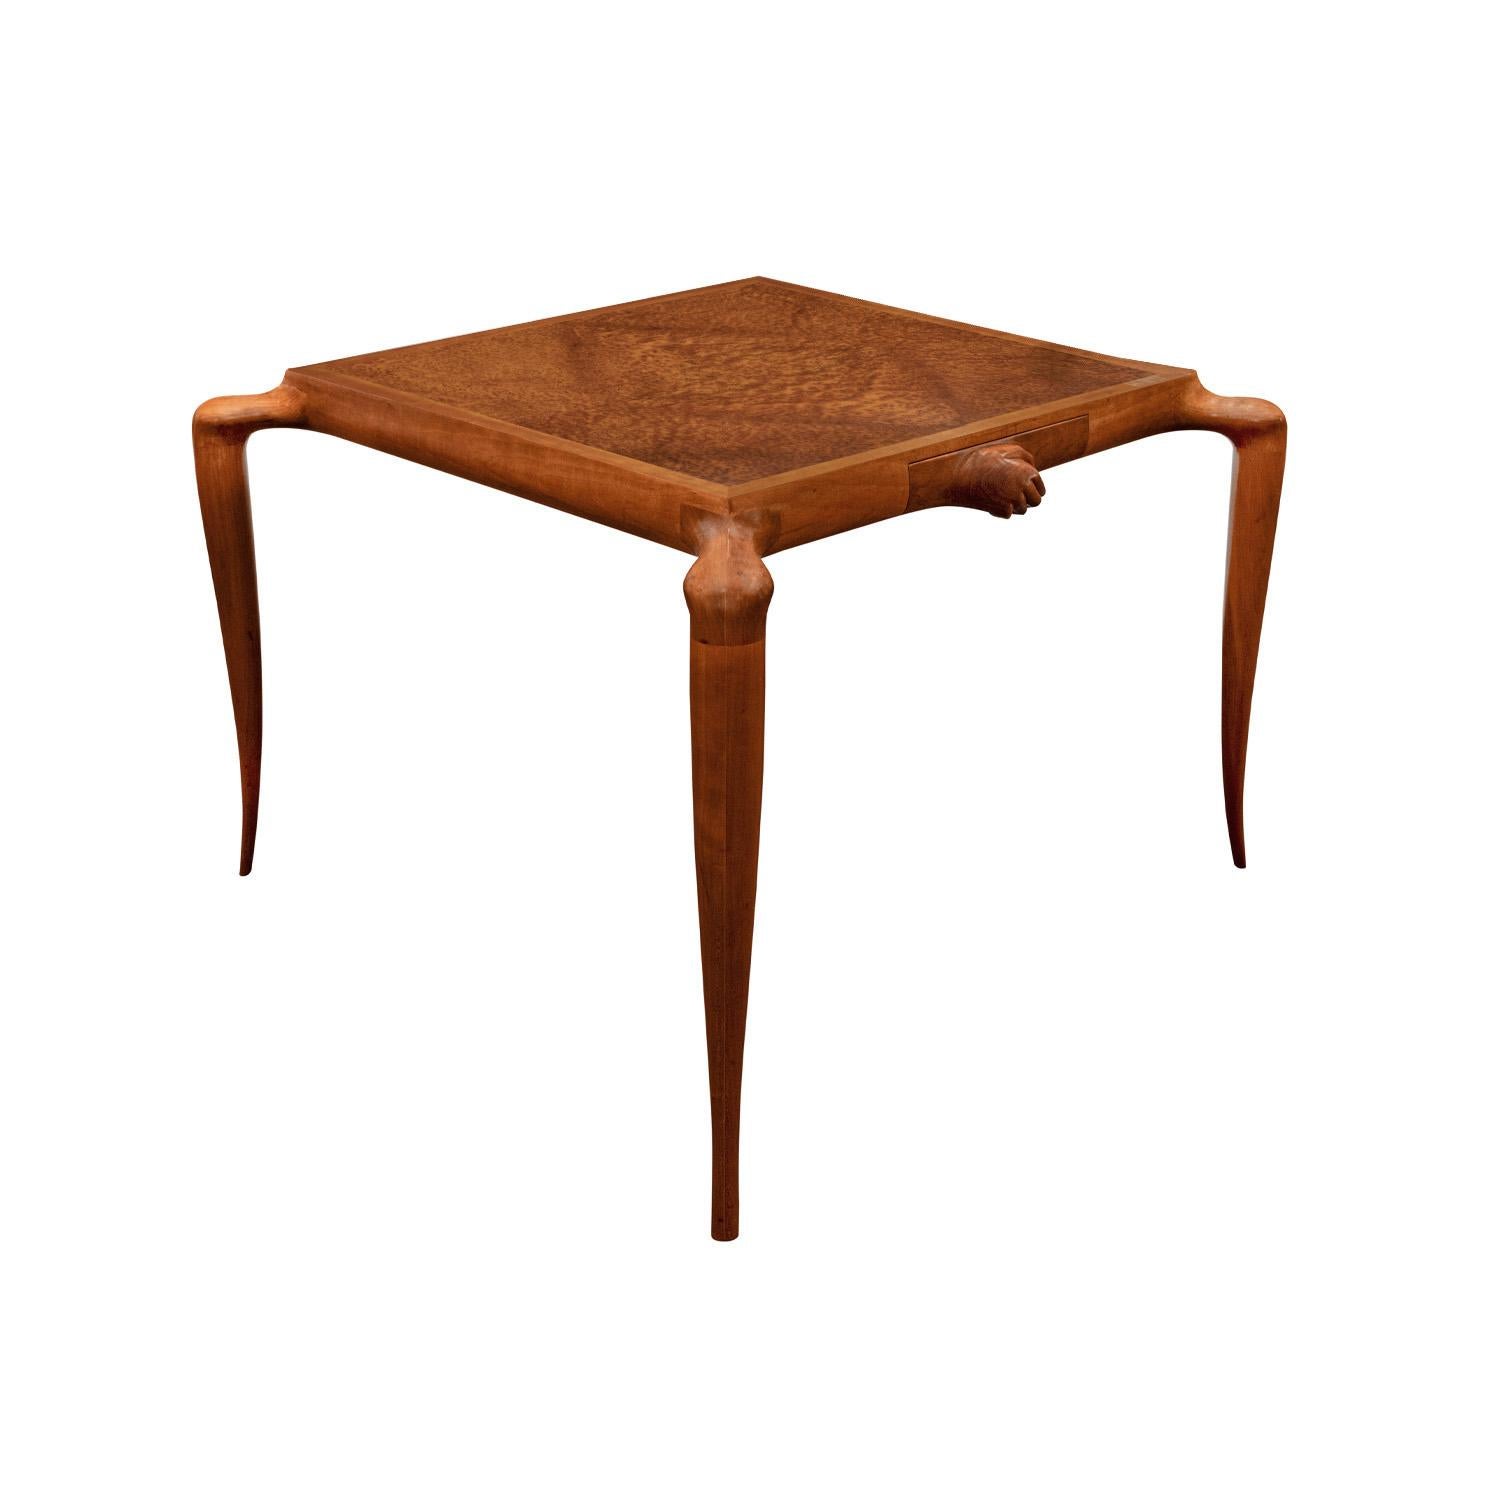 Mid-Century Modern Philip LaVerne Important Sculpture Game Table with Carved Hands 1966, 'Signed'